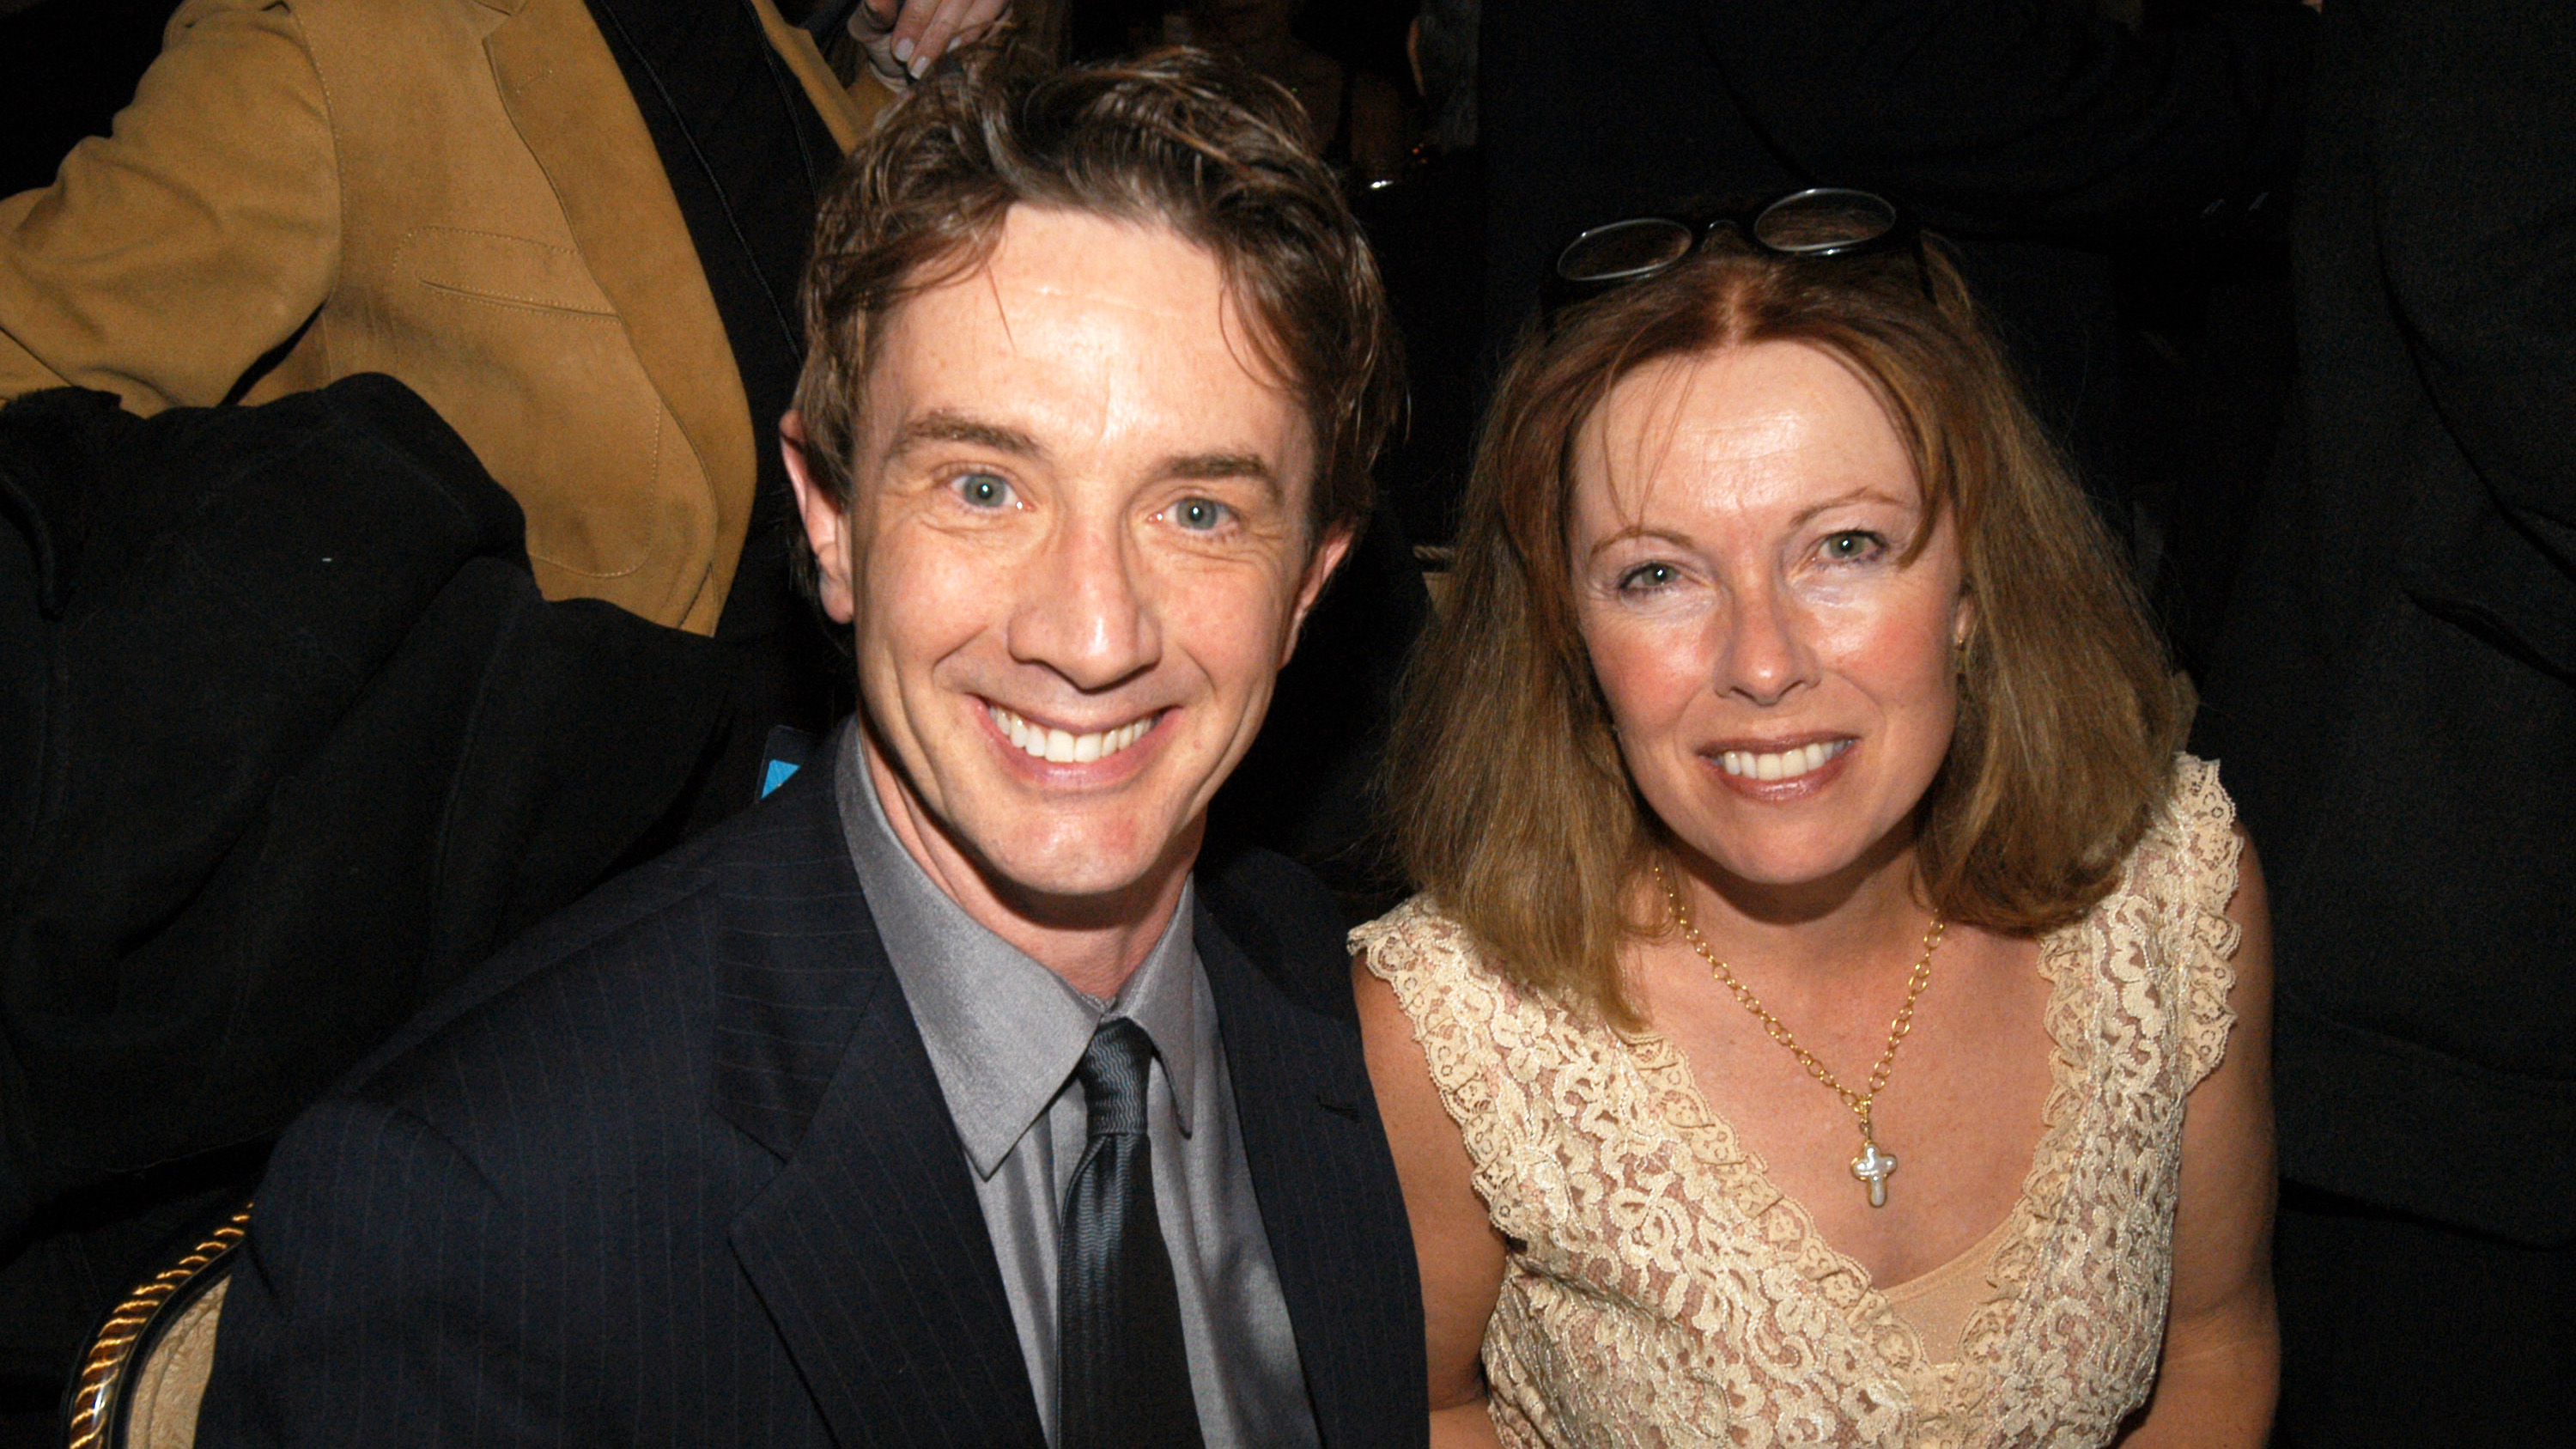 Martin Short Opens Up About Losing His Beloved Wife to Cancer